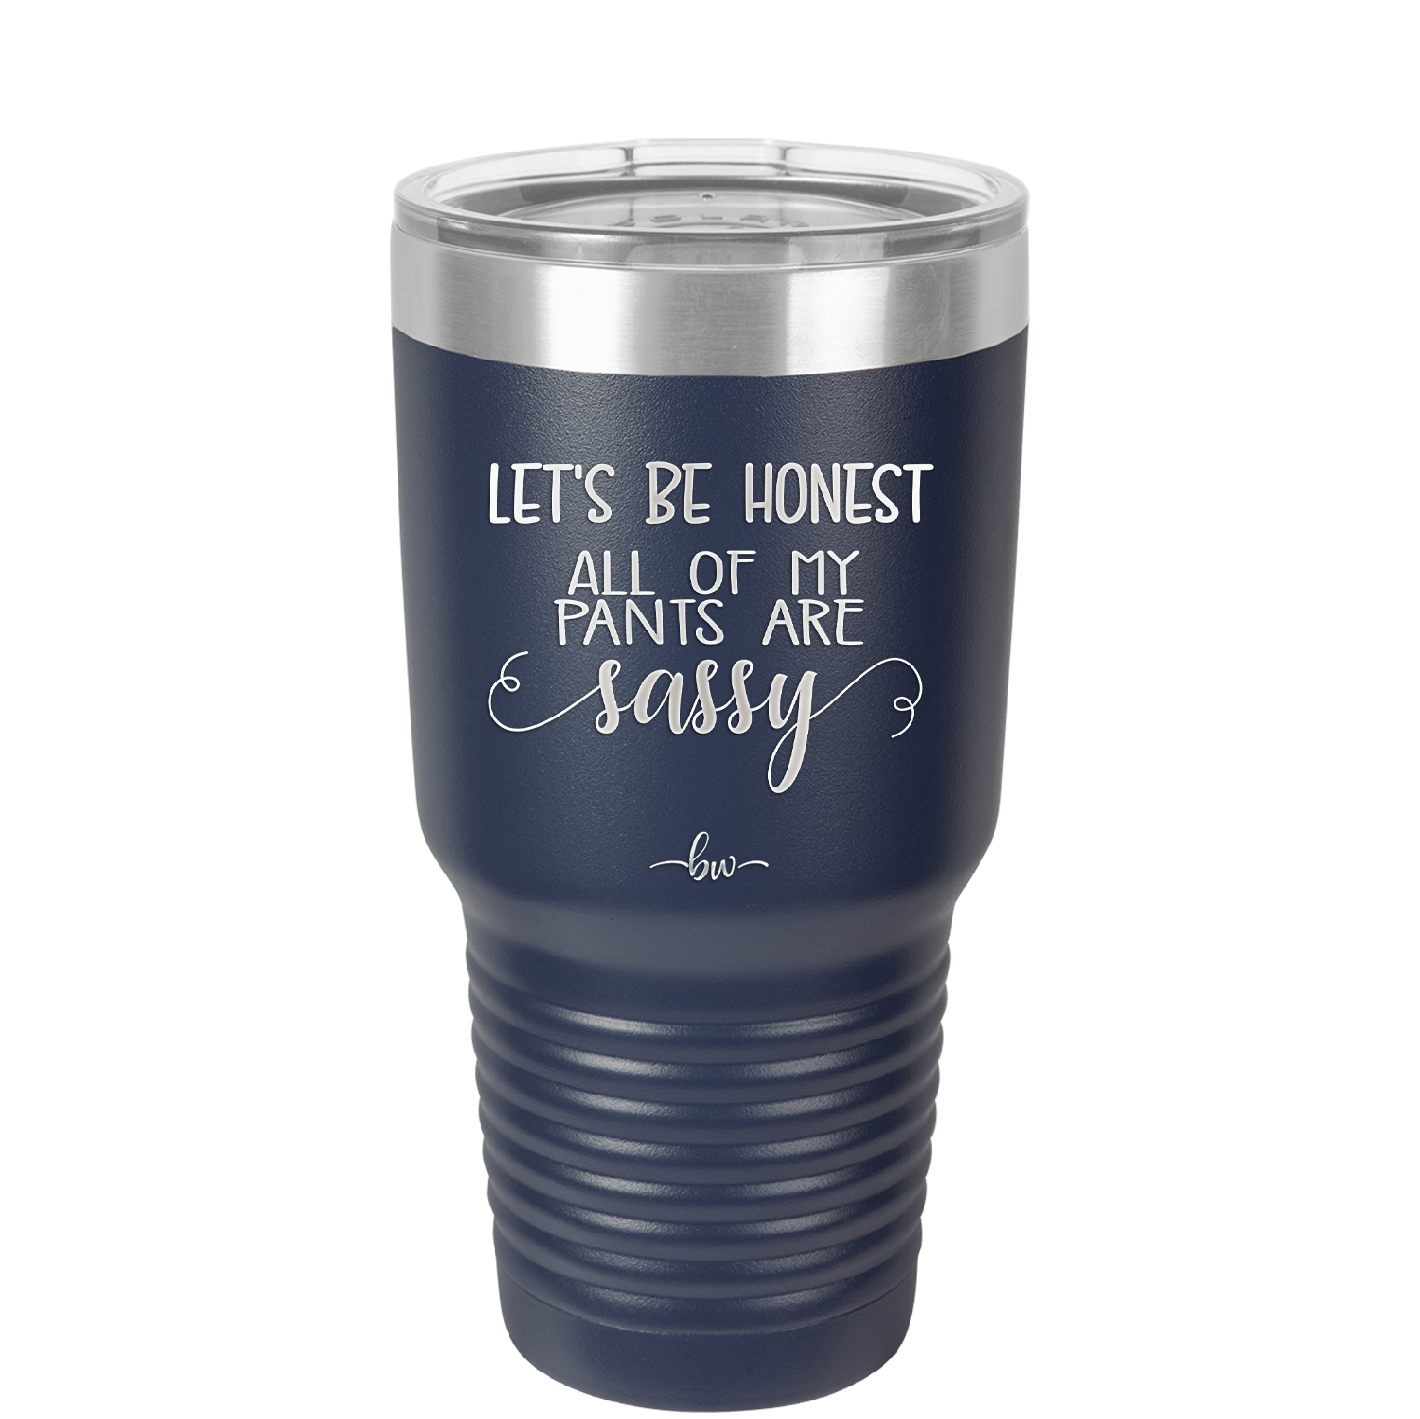 Let's Be Honest All of My Pants are Sassy - Laser Engraved Stainless Steel Drinkware - 2439 -